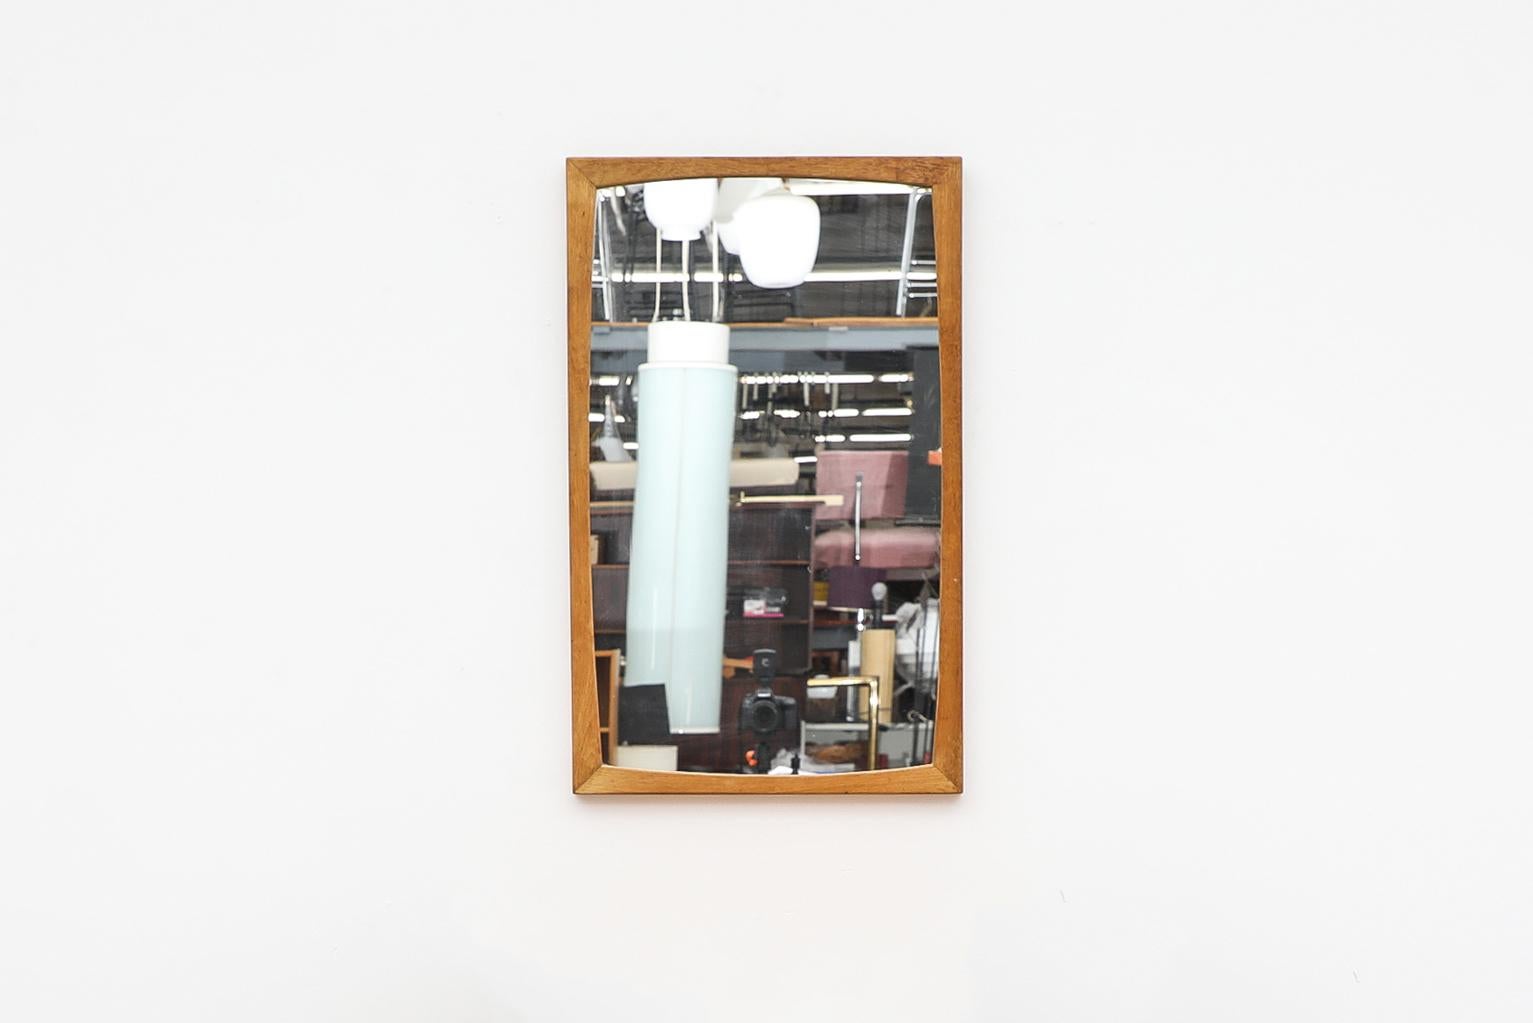 Danish Mid-Century Modern mirror with oak frame. In original condition with visible wear consistent with its age and use.